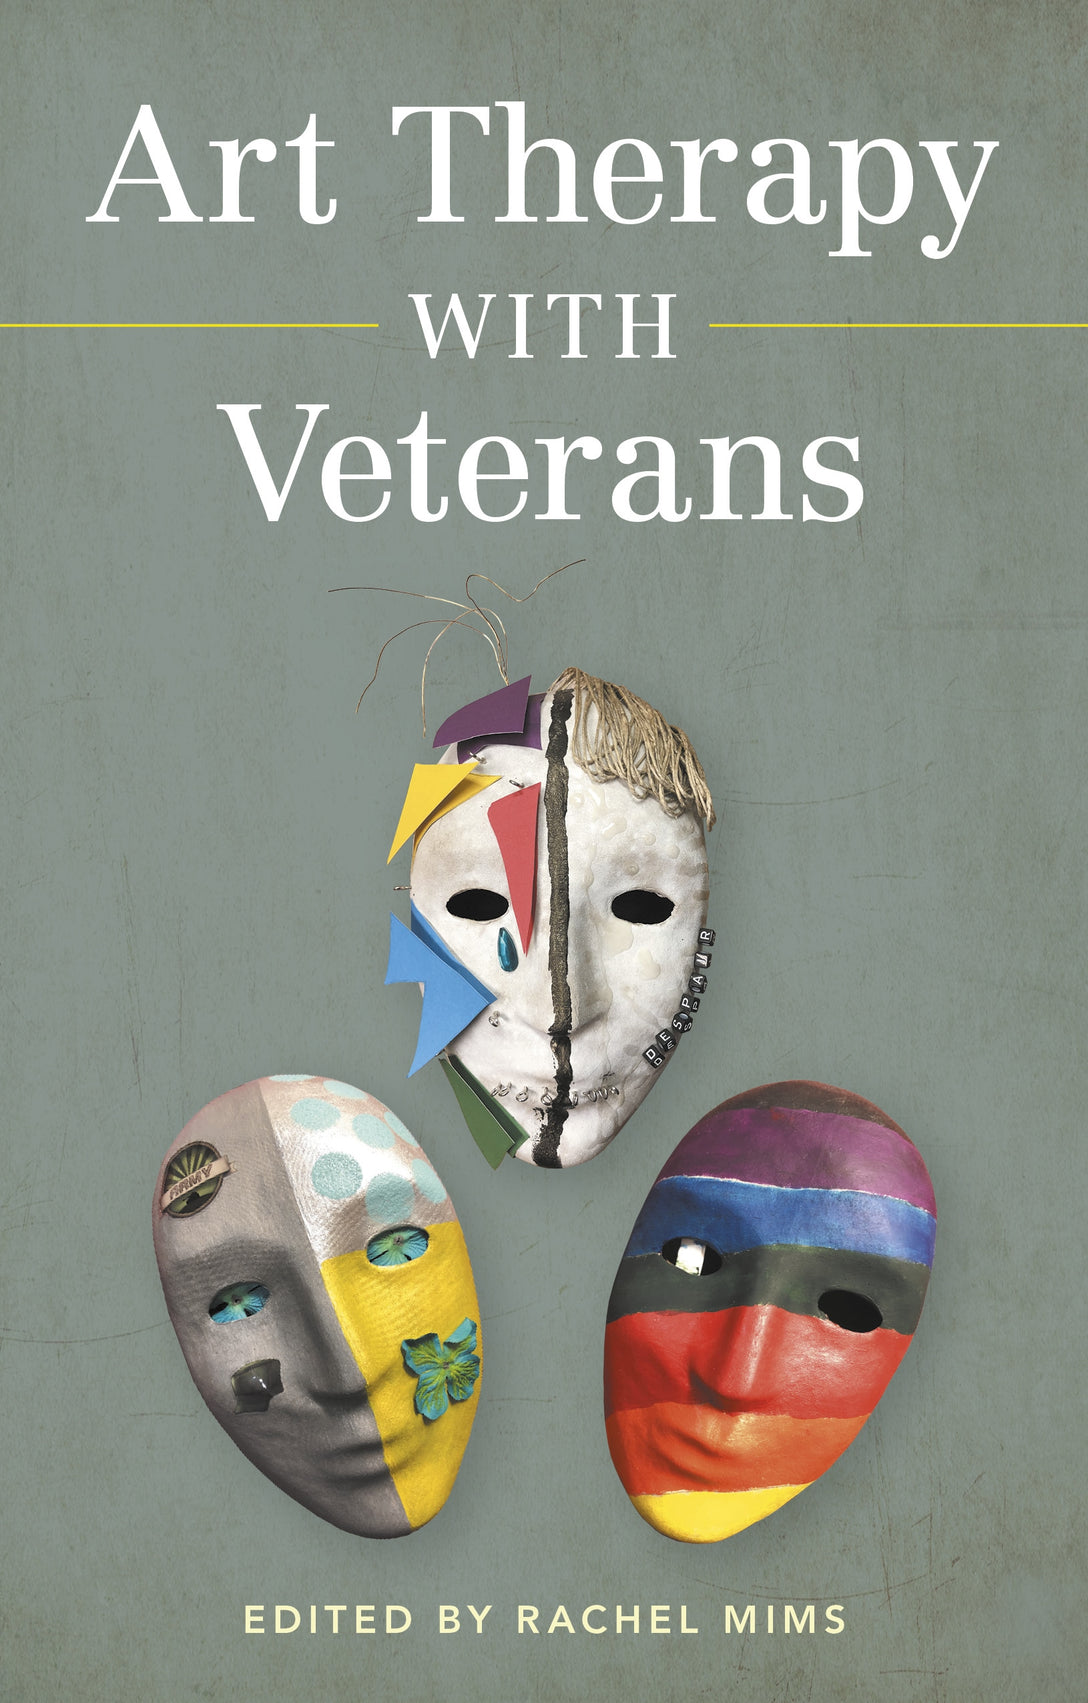 Art Therapy with Veterans by No Author Listed, Rachel Mims